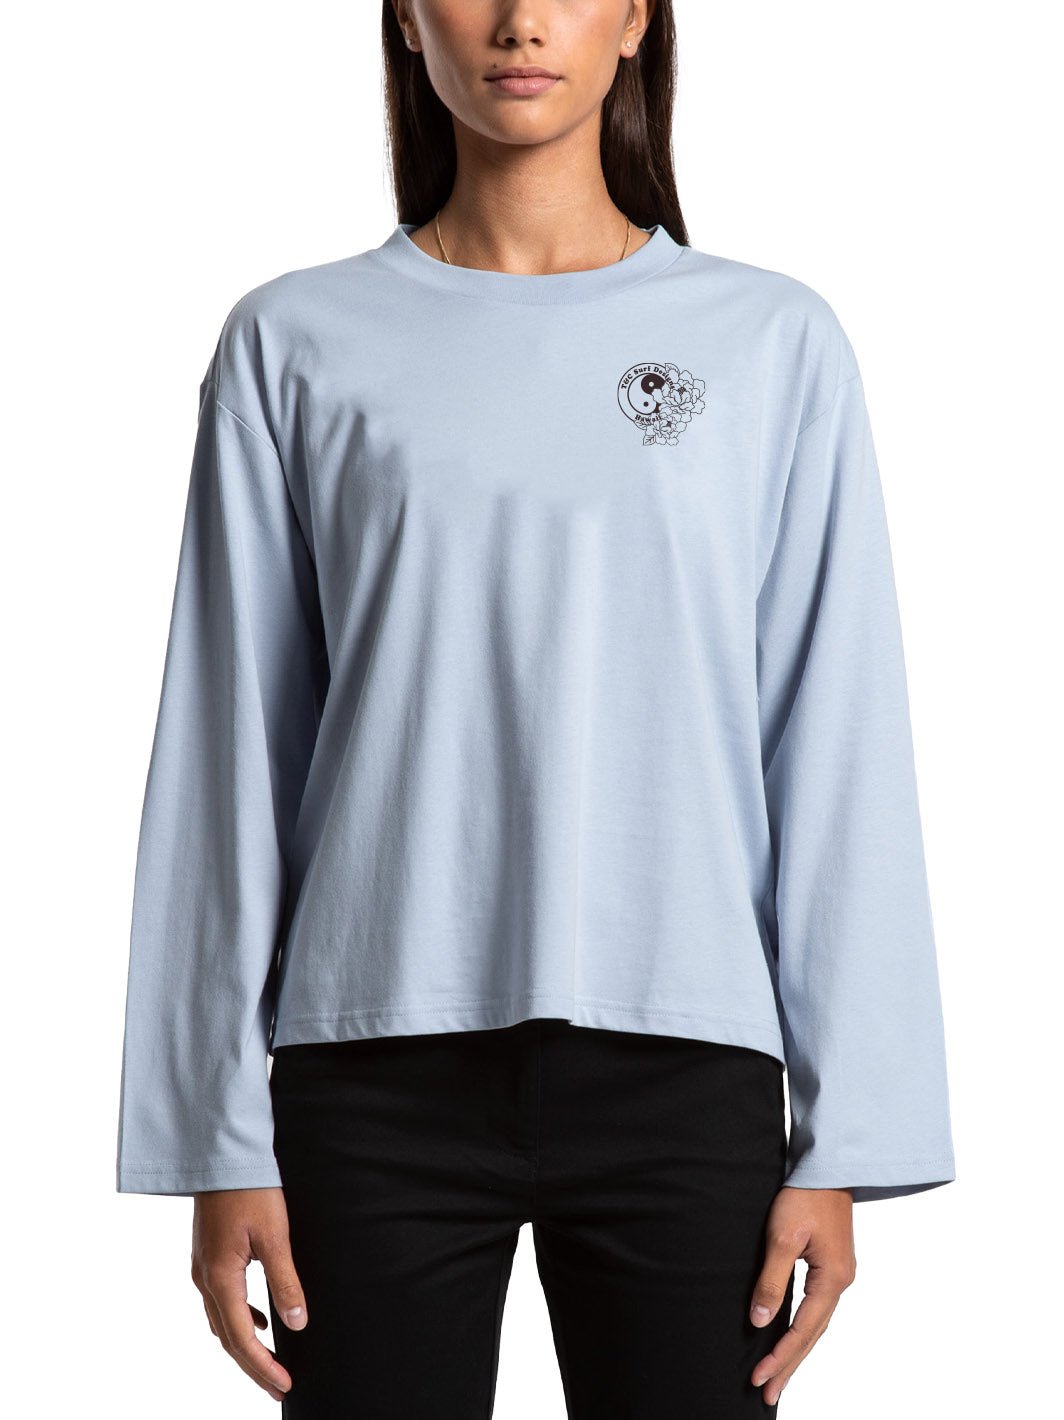 T&C Surf Designs T&C Surf Year of the Dragon 2 Long Sleeve, 